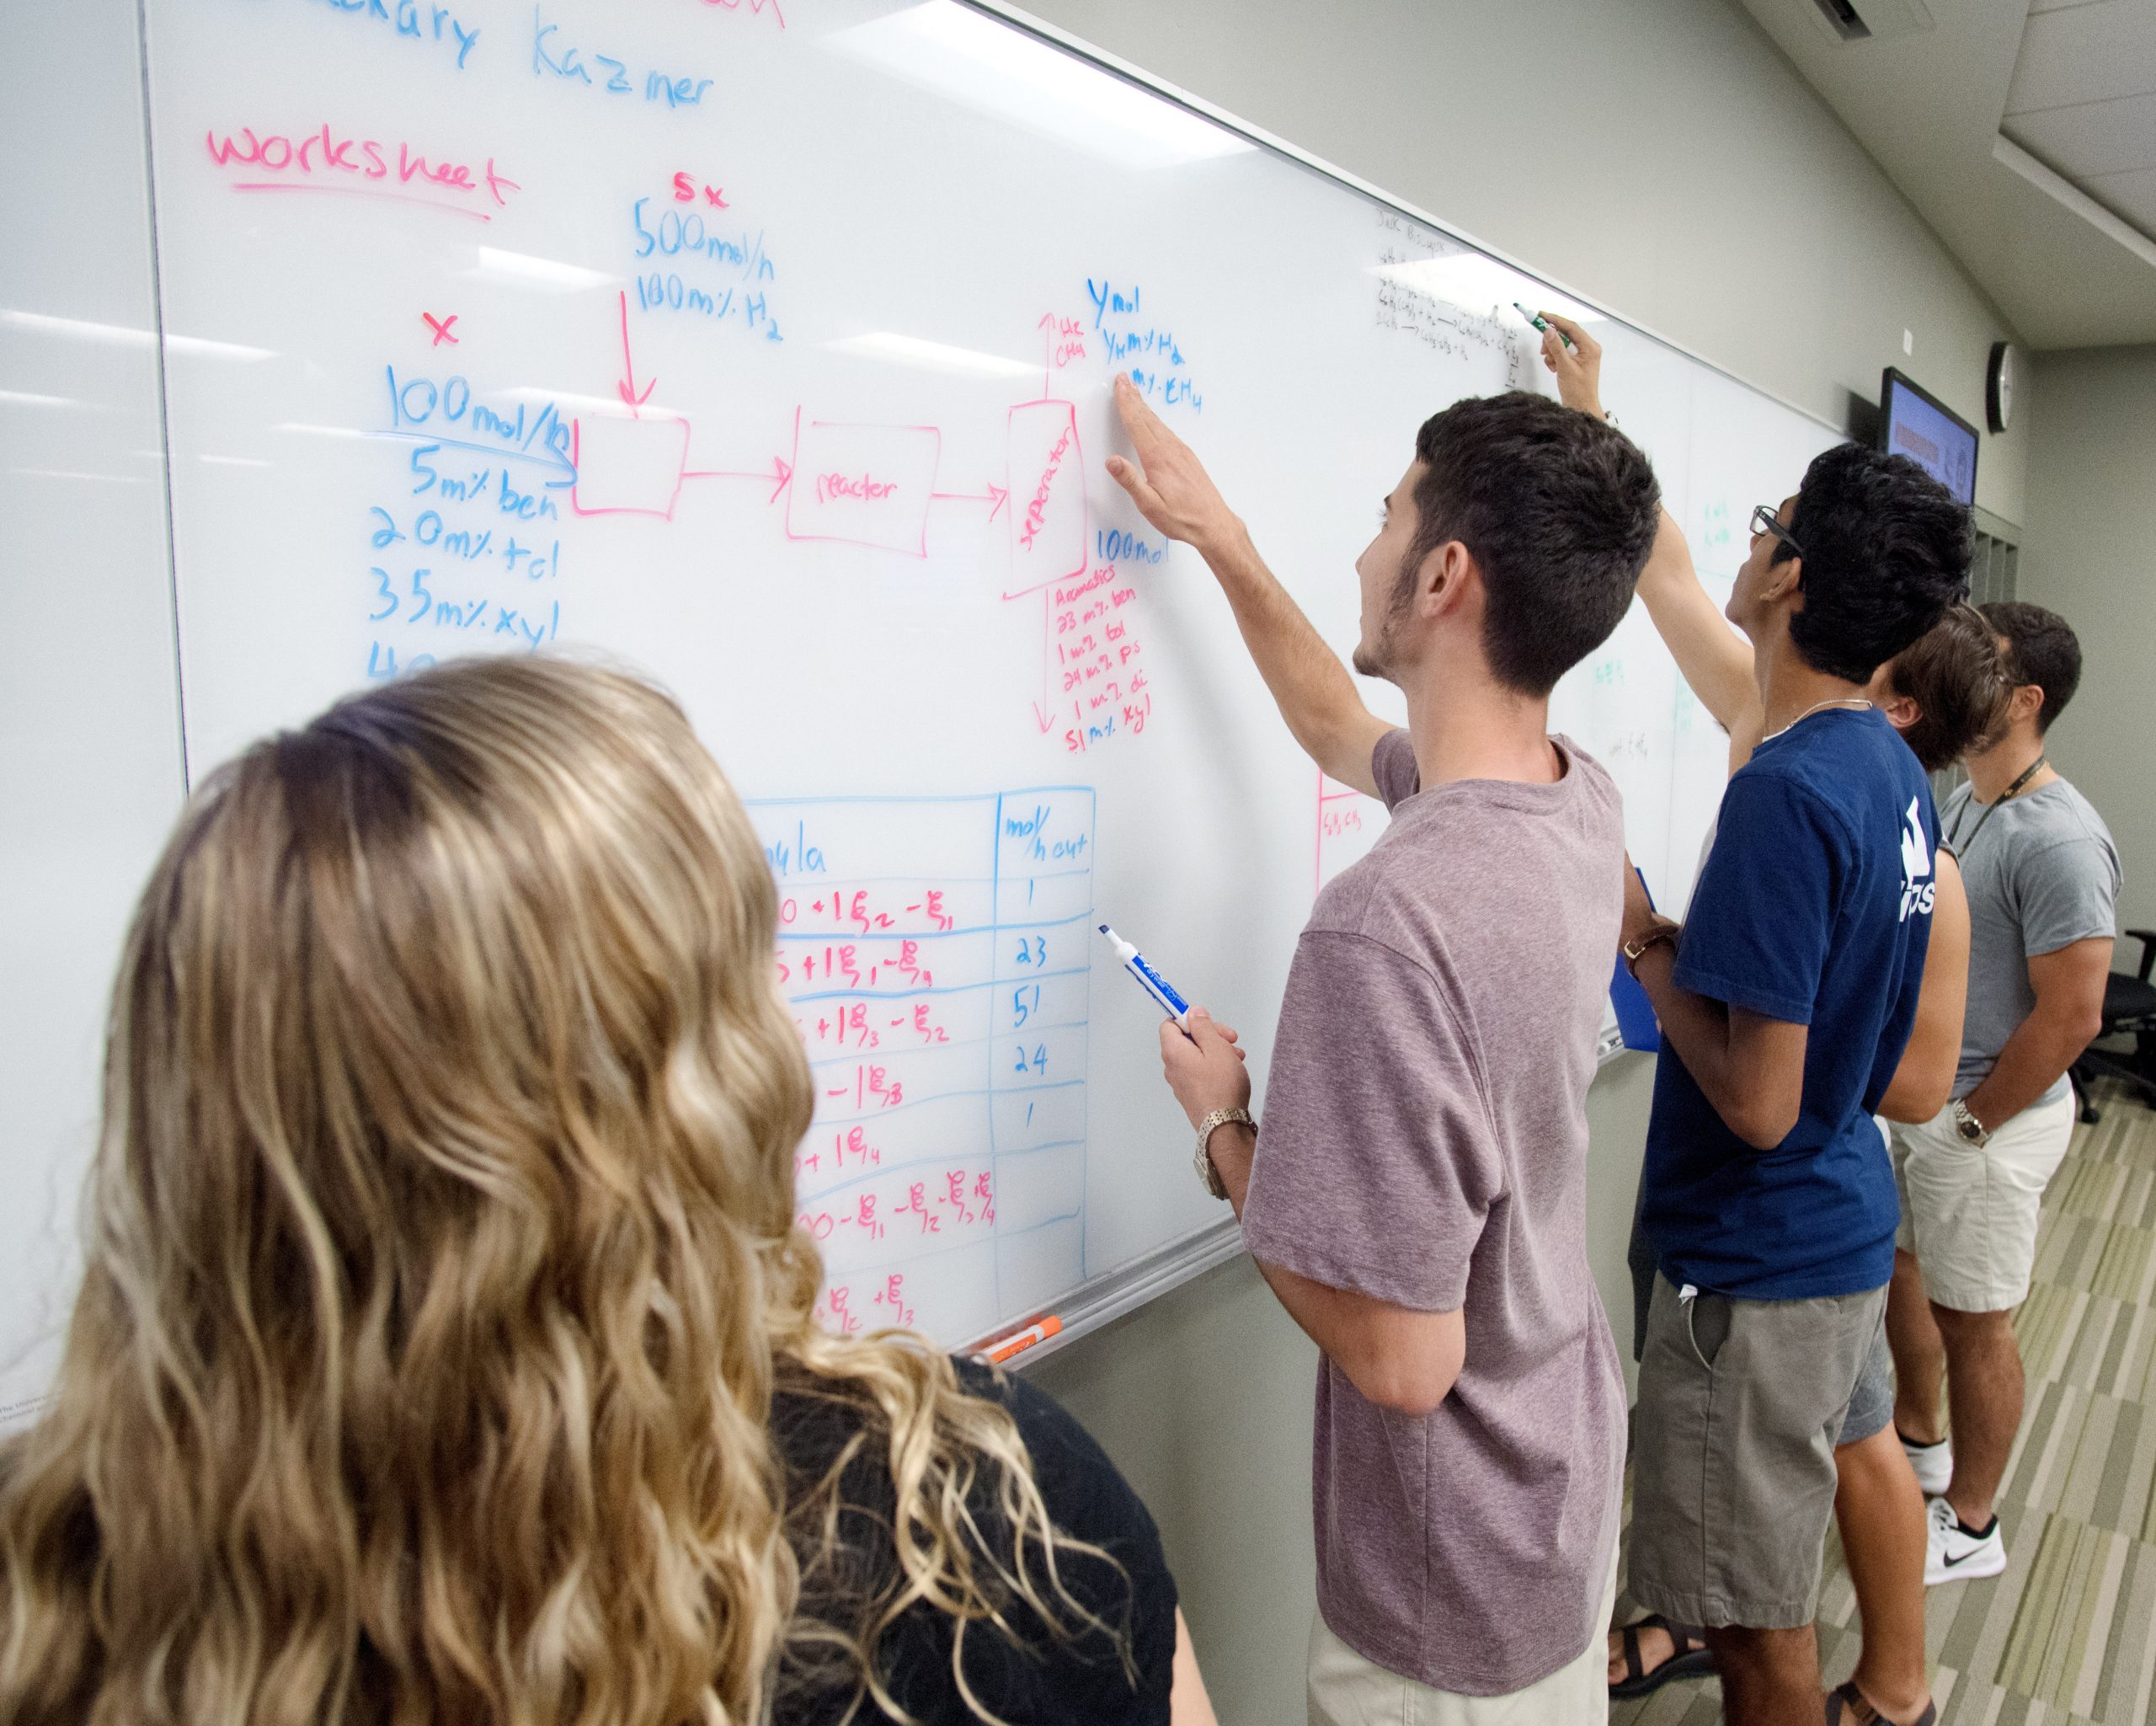 Students in an engineering class working on the whiteboard in an active learning classroom.